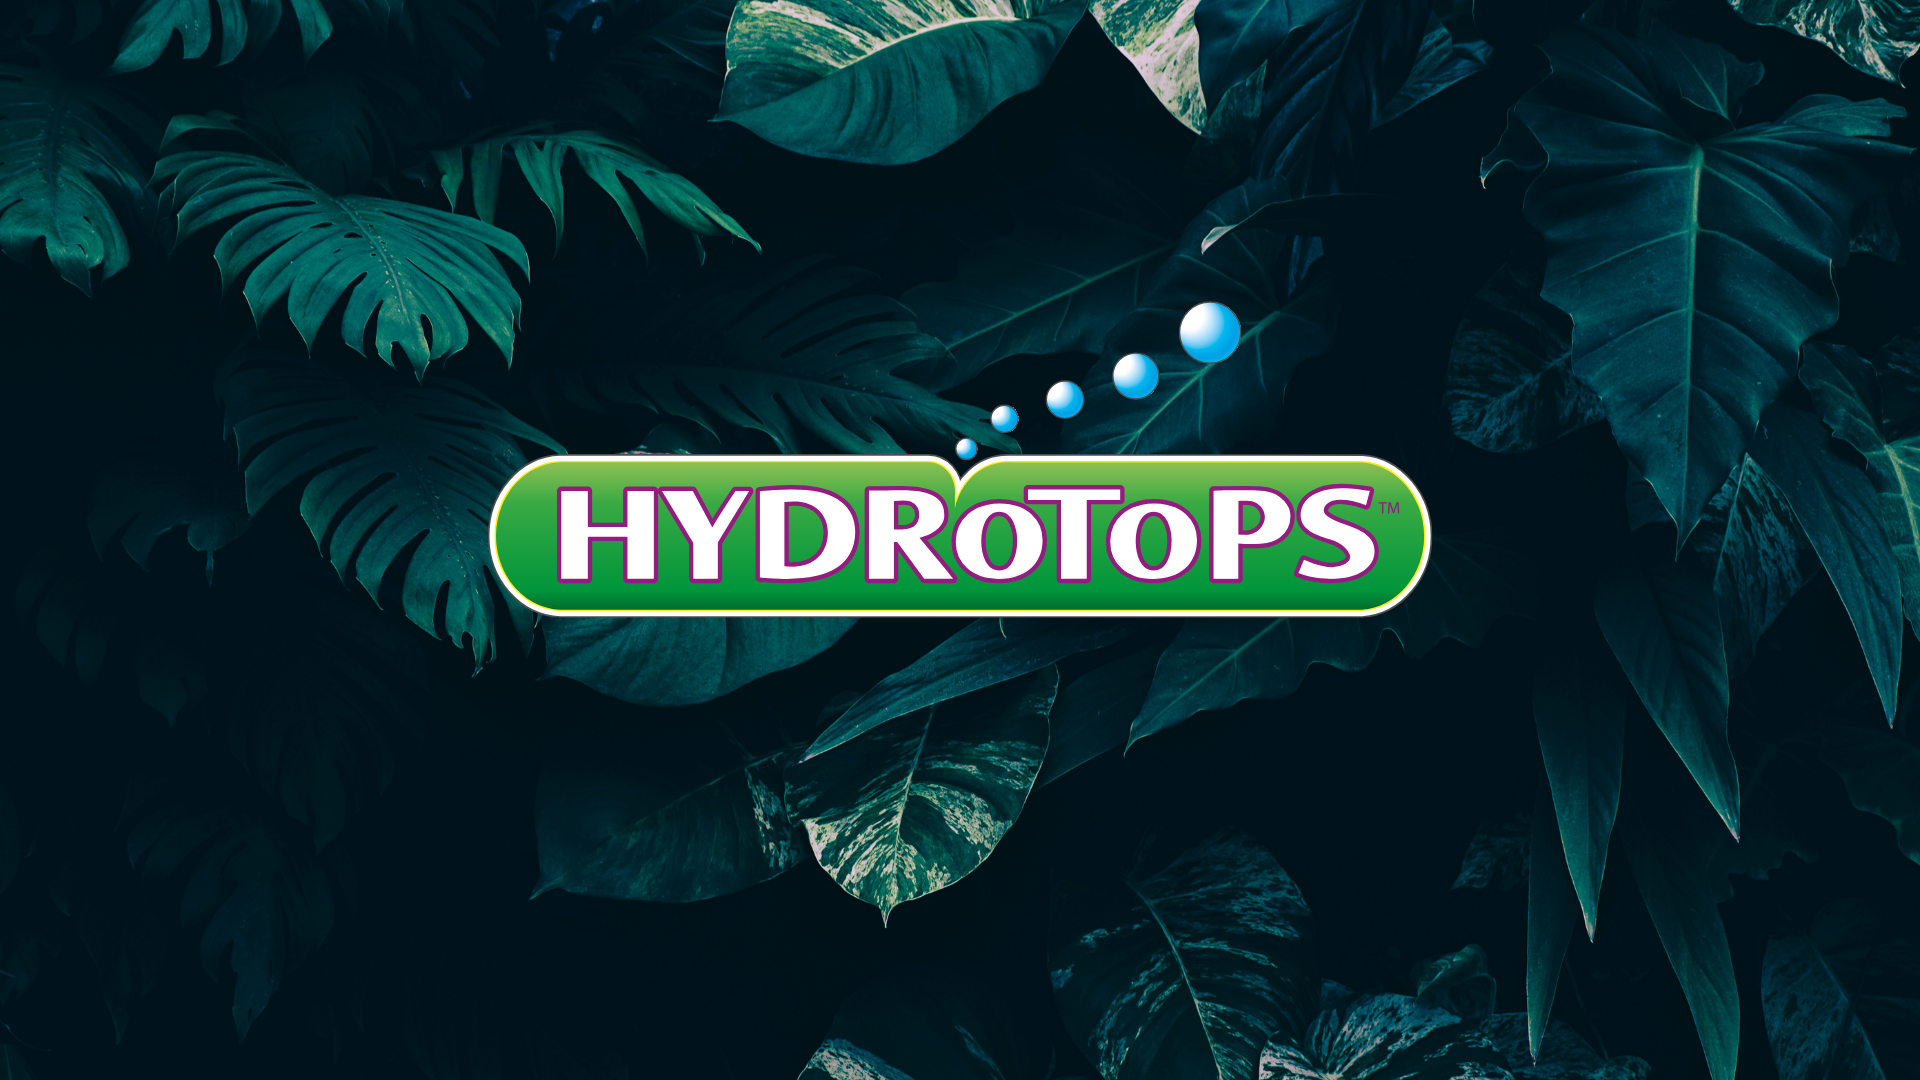 HydroTops Nutrient Range: Complete Guide